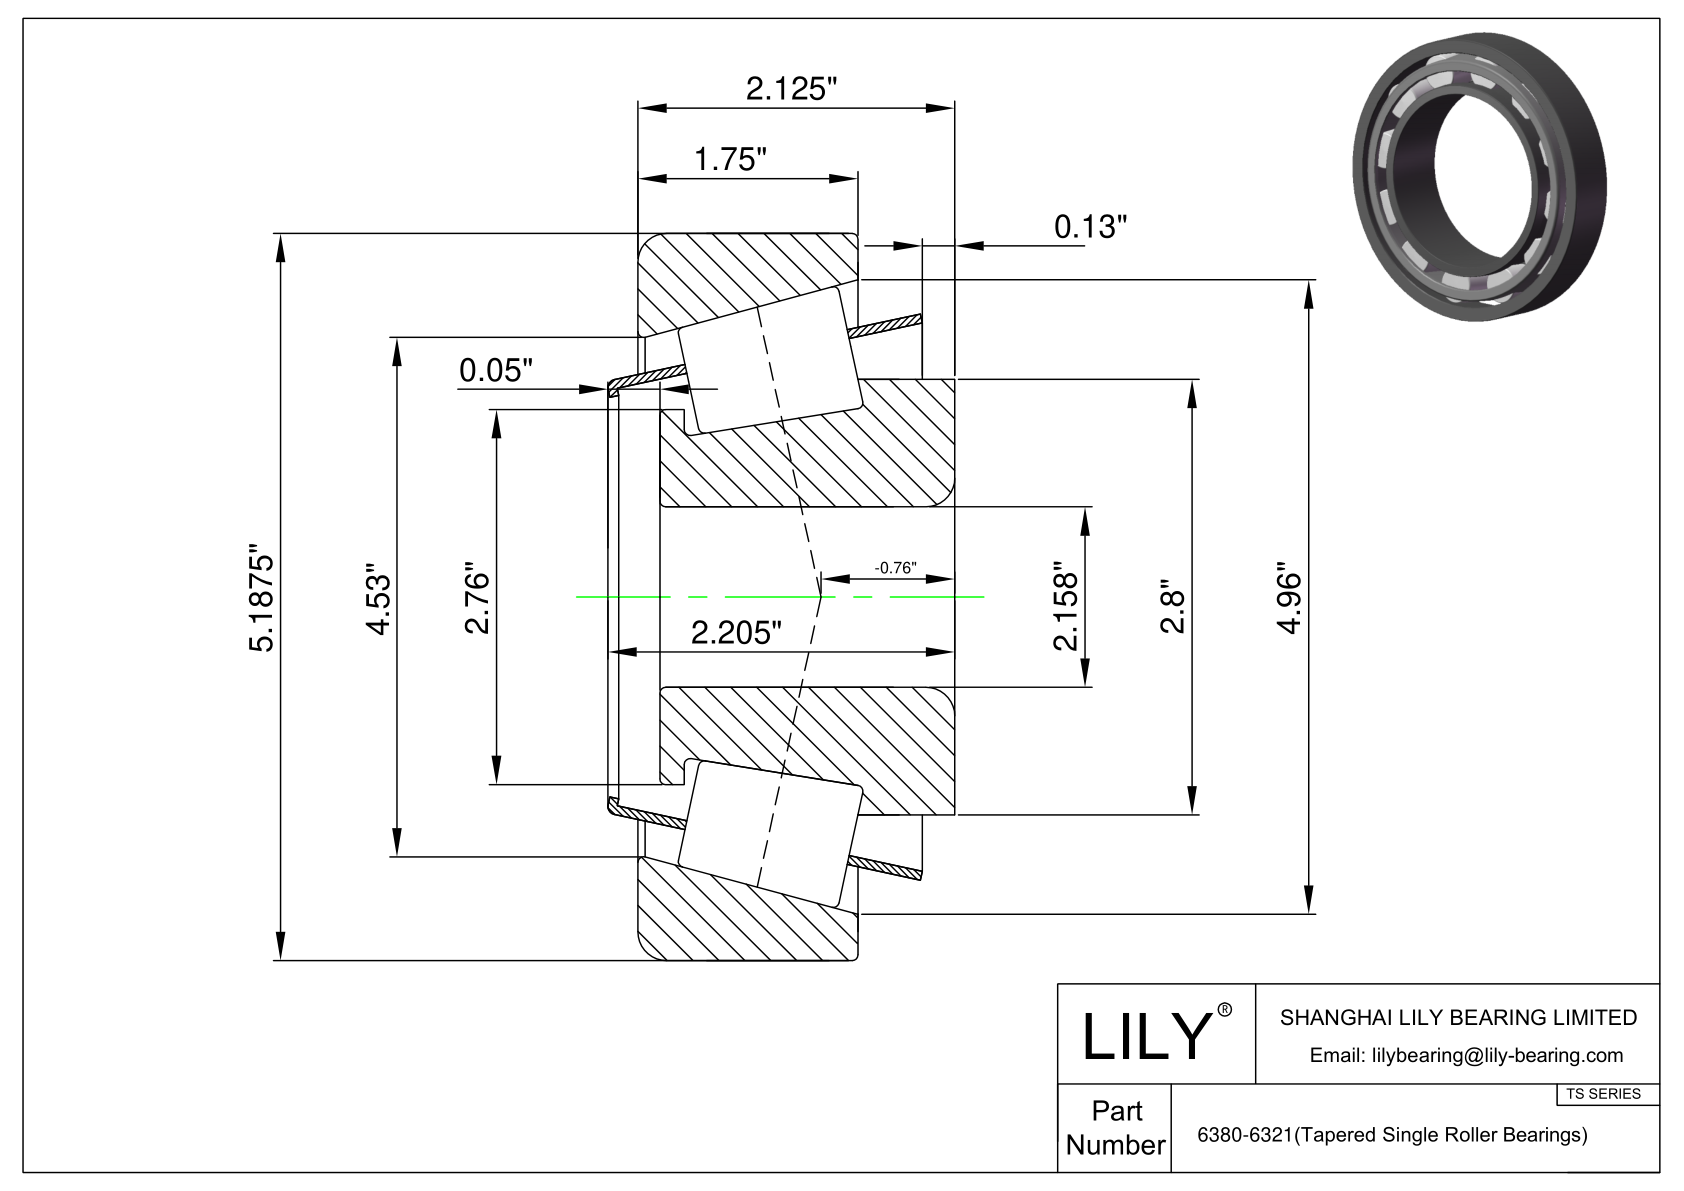 6380-6321 TS (Tapered Single Roller Bearings) (Imperial) cad drawing